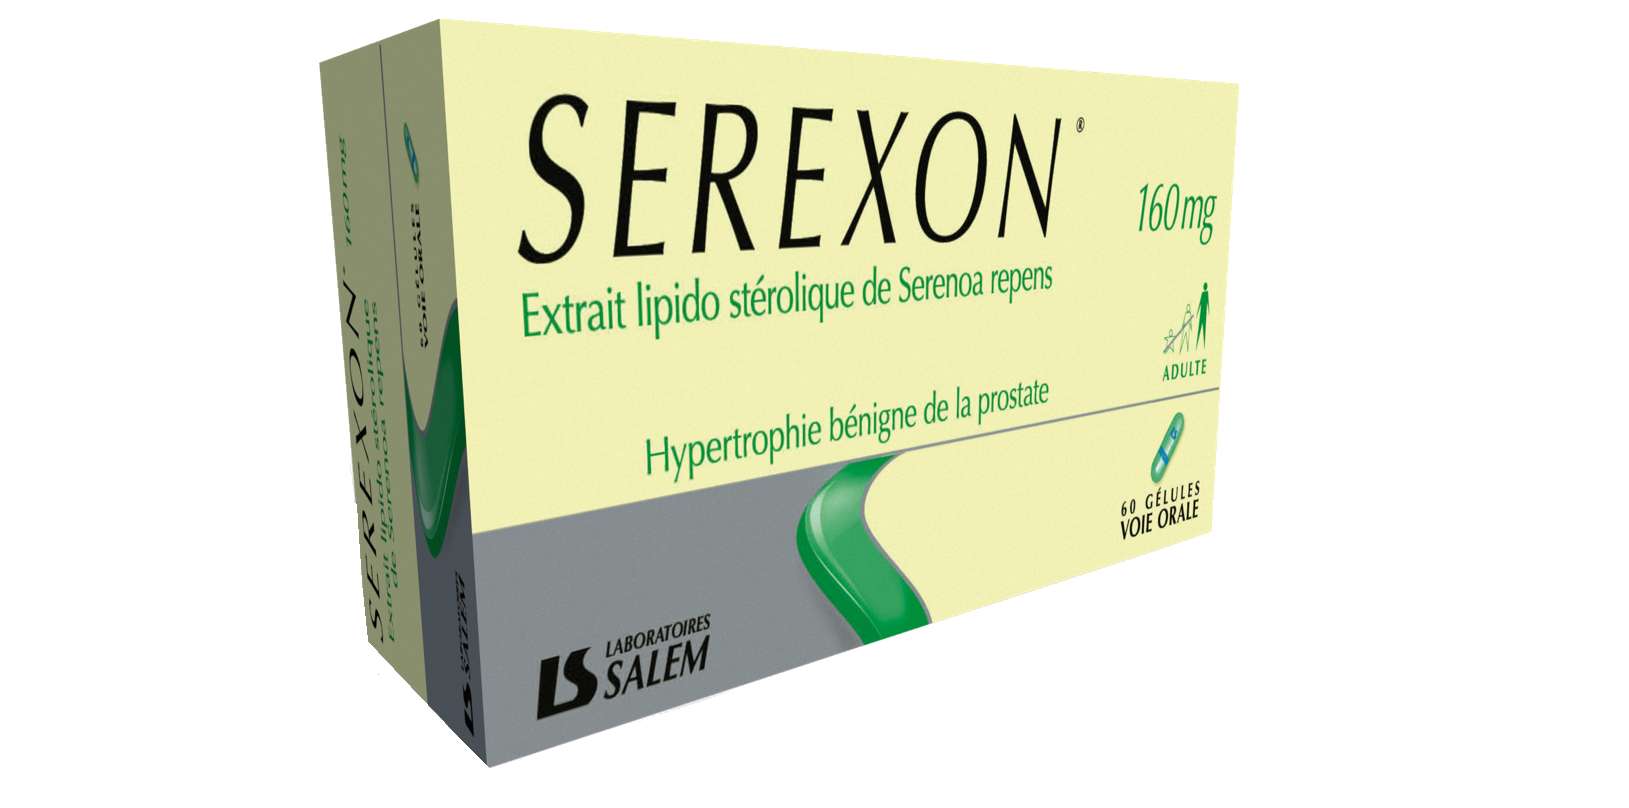 You are currently viewing Serexon 160 mg